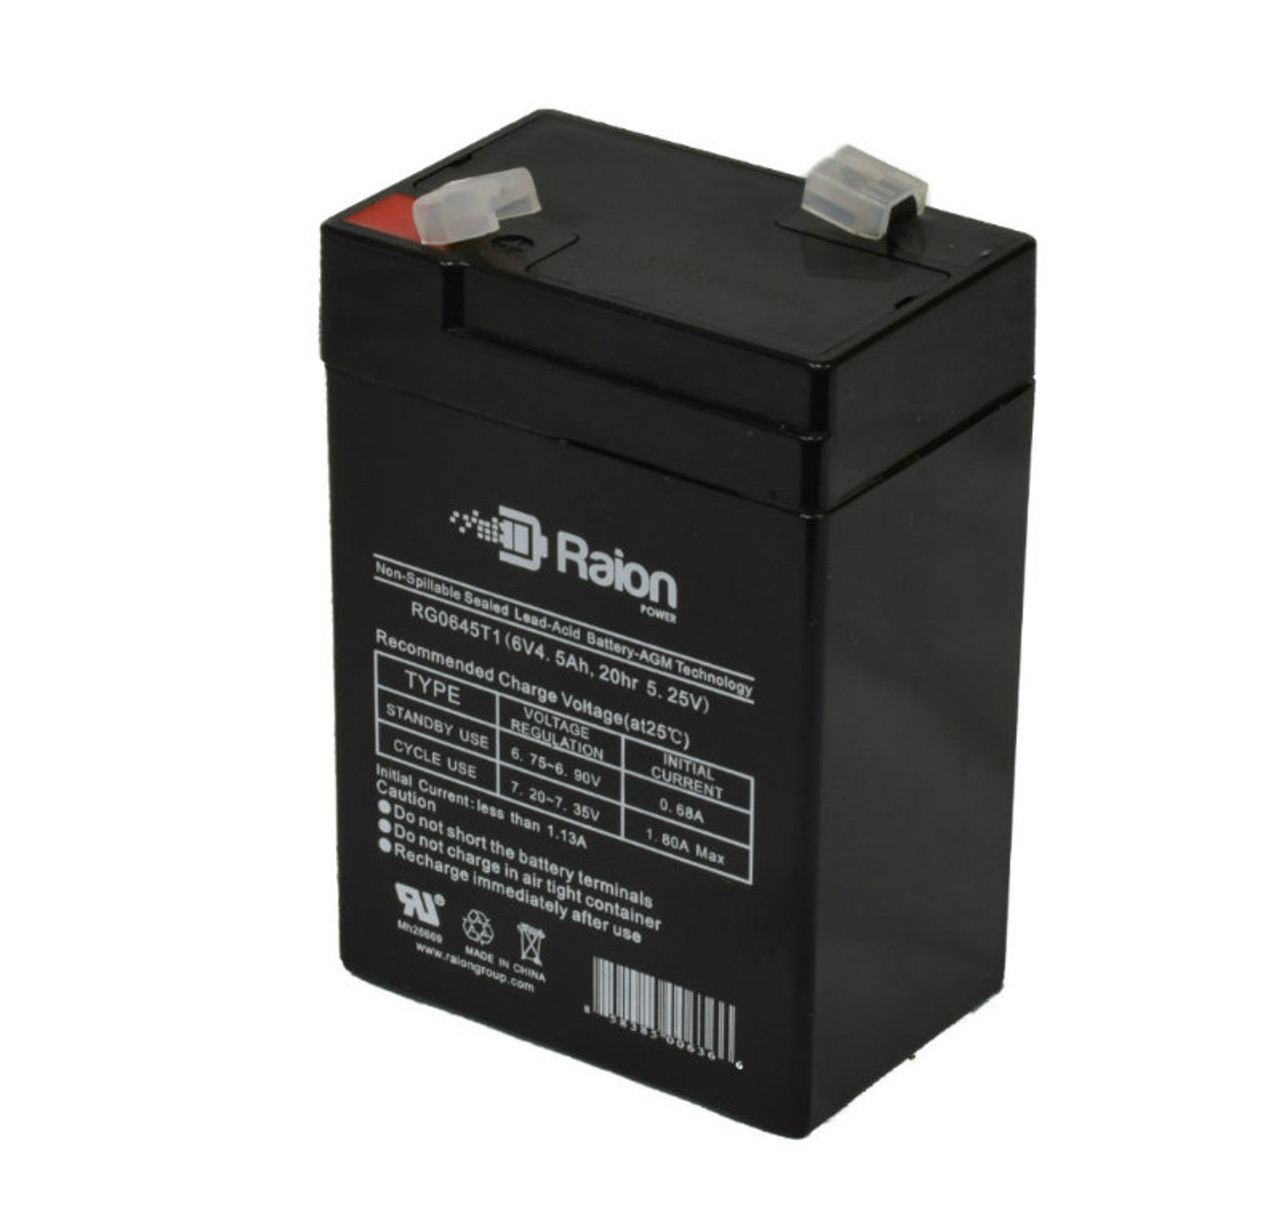 Raion Power RG0645T1 6V 4.5Ah Replacement Battery Cartridge for Dual-Lite HCXUGBRC12